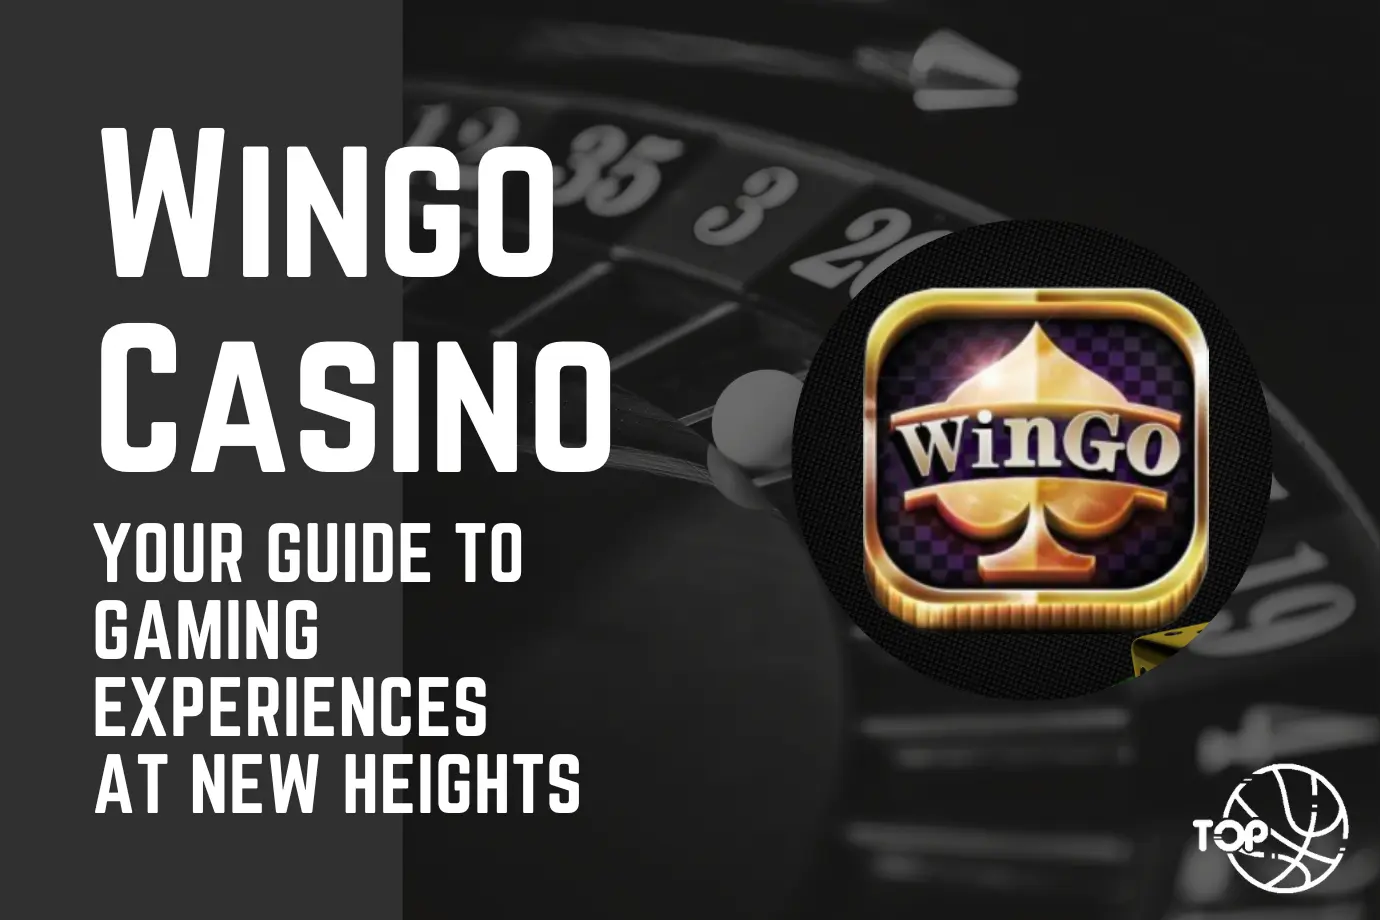 Wingo Casino: Your Guide to Gaming Experiences at New Heights